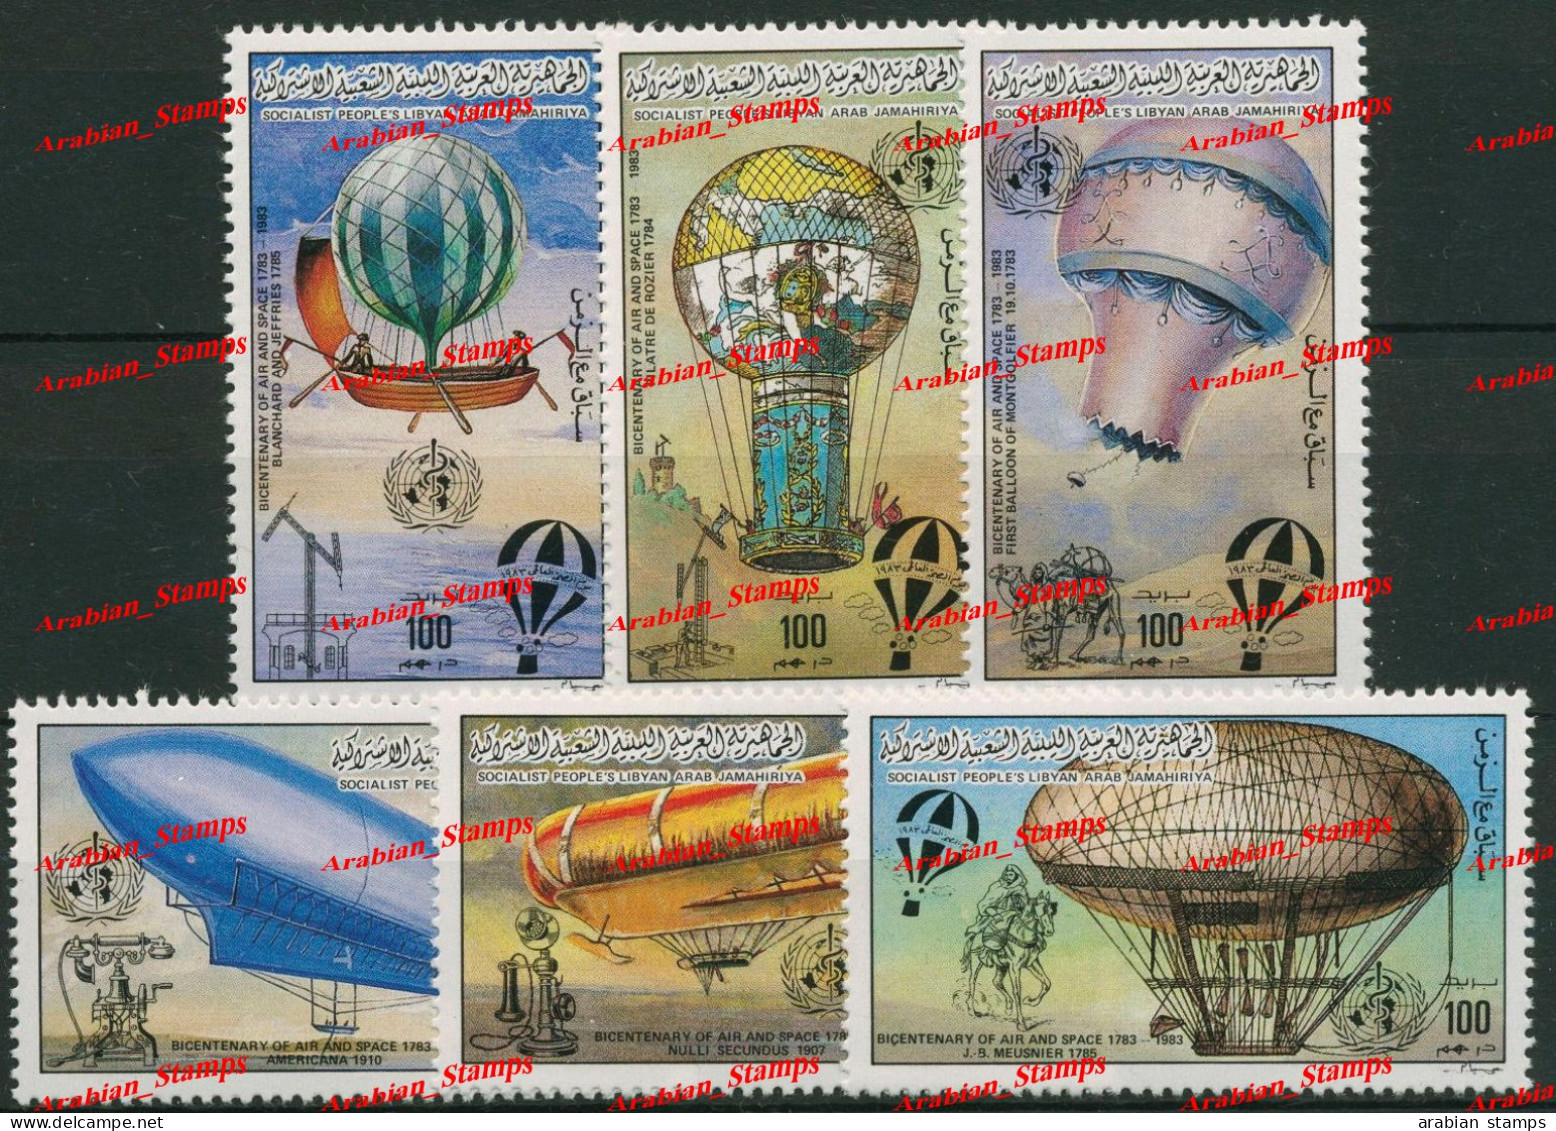 LIBYA 1983 MNH AIR AND SPACE BICENTENARY 1ST MANNED FLIGHT 200TH ZEPPELIN  AIR BALLOON AEROSTAT JOINT ISSUE - Libia